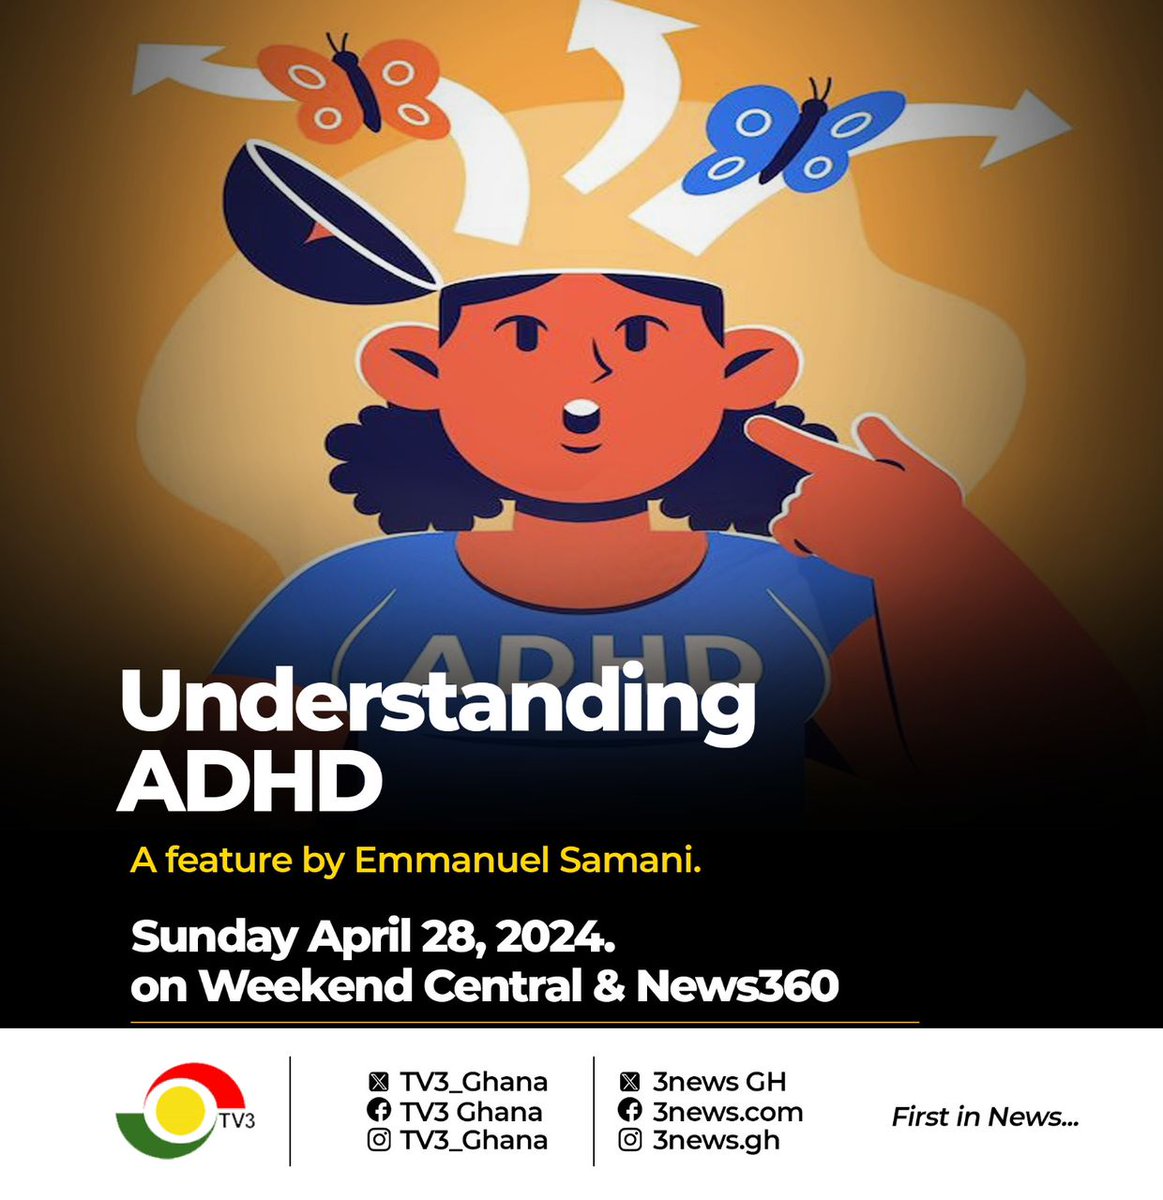 Today on #WeekendCentral at 12pm and #News360 at 7pm, we bring you a feature on ADHD.